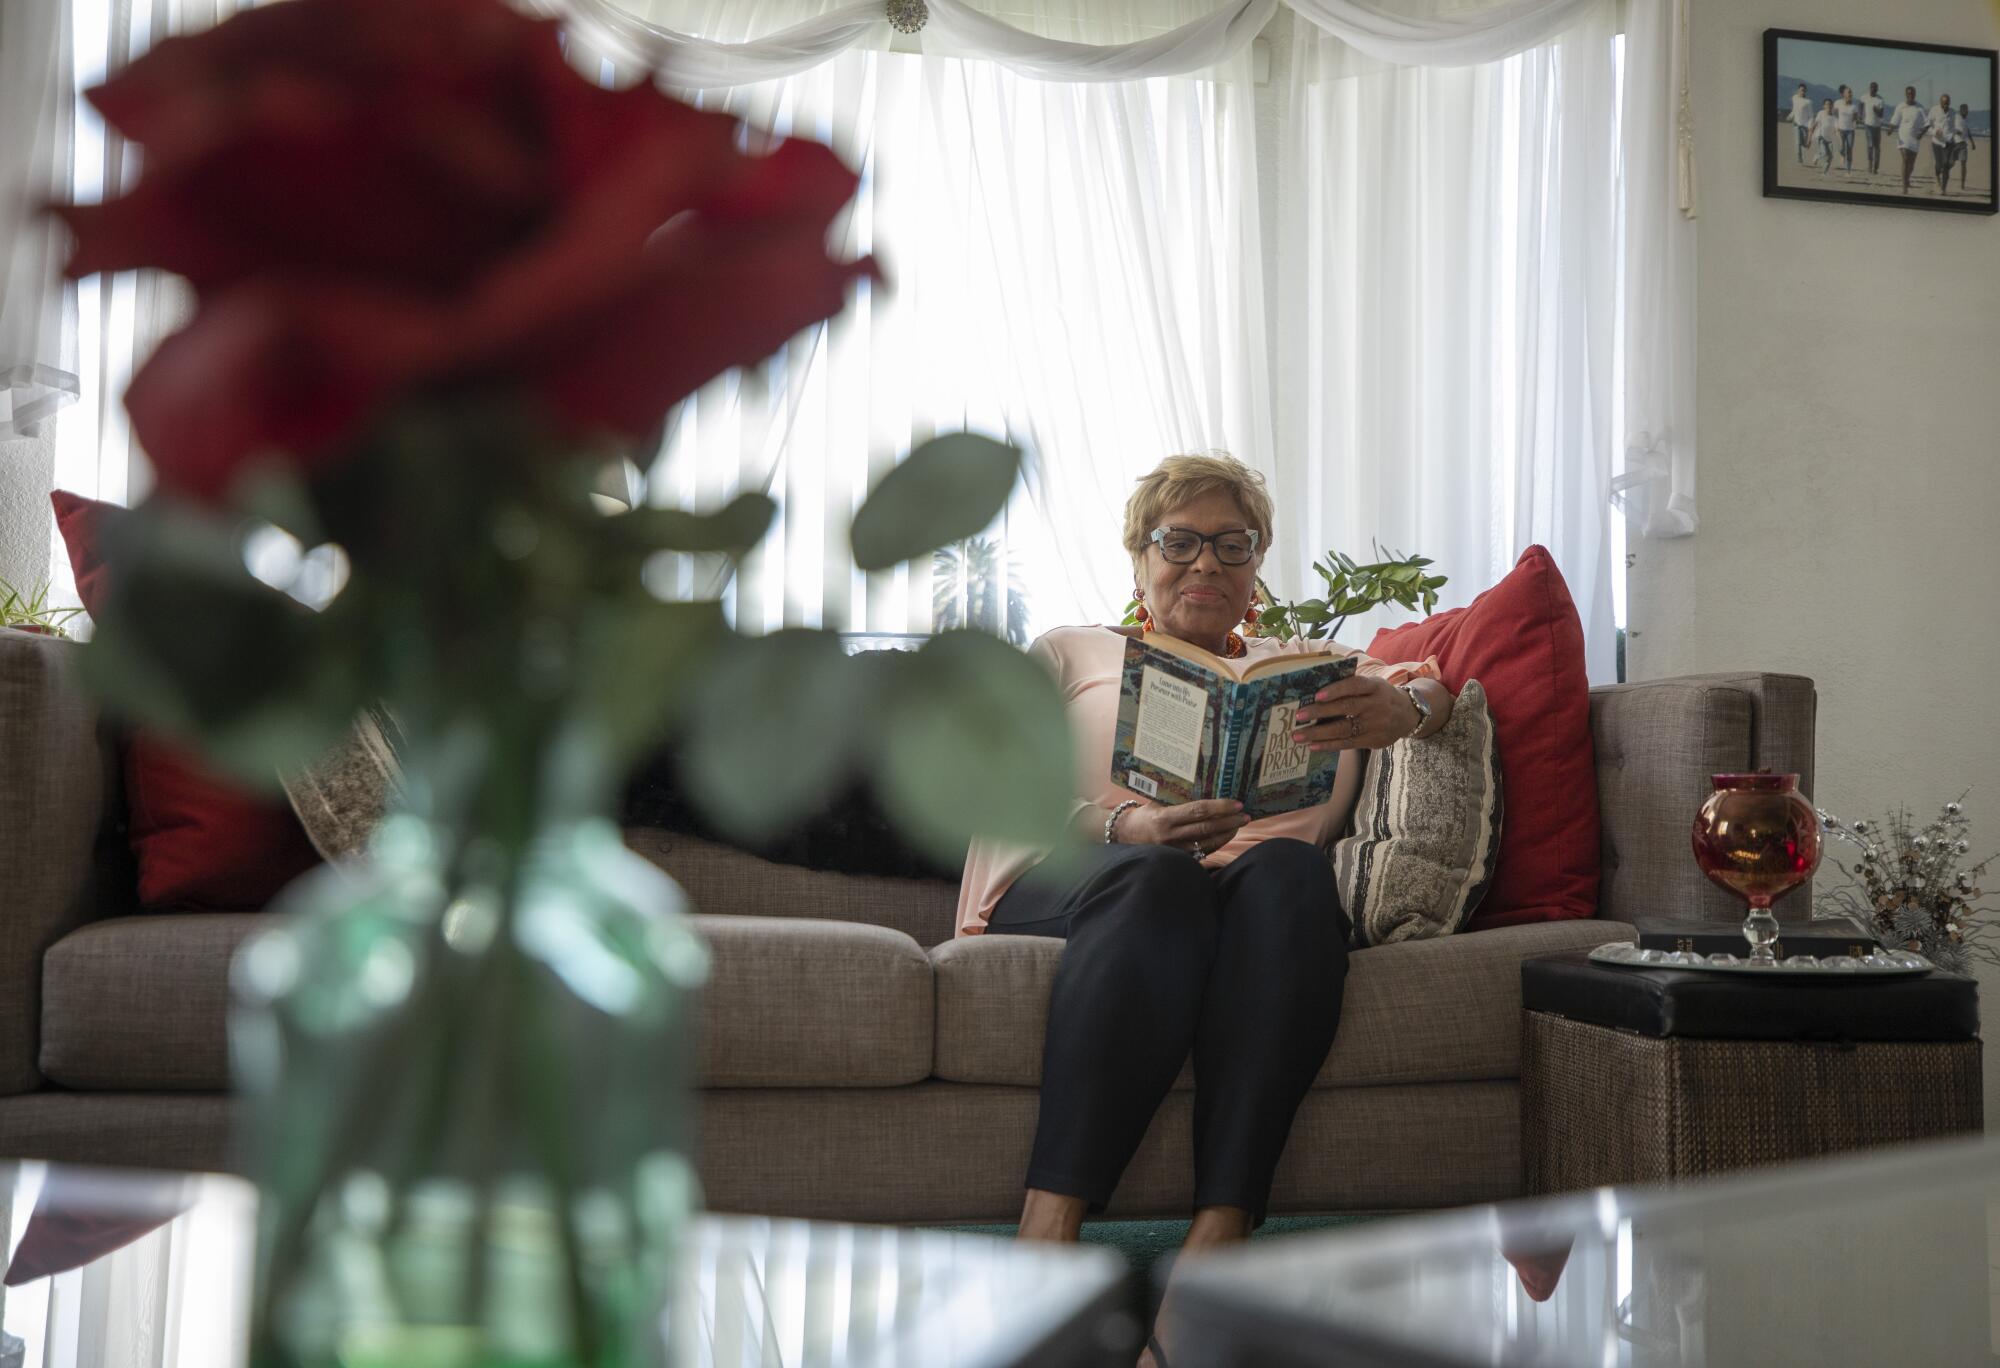 A woman on a couch reads a book.